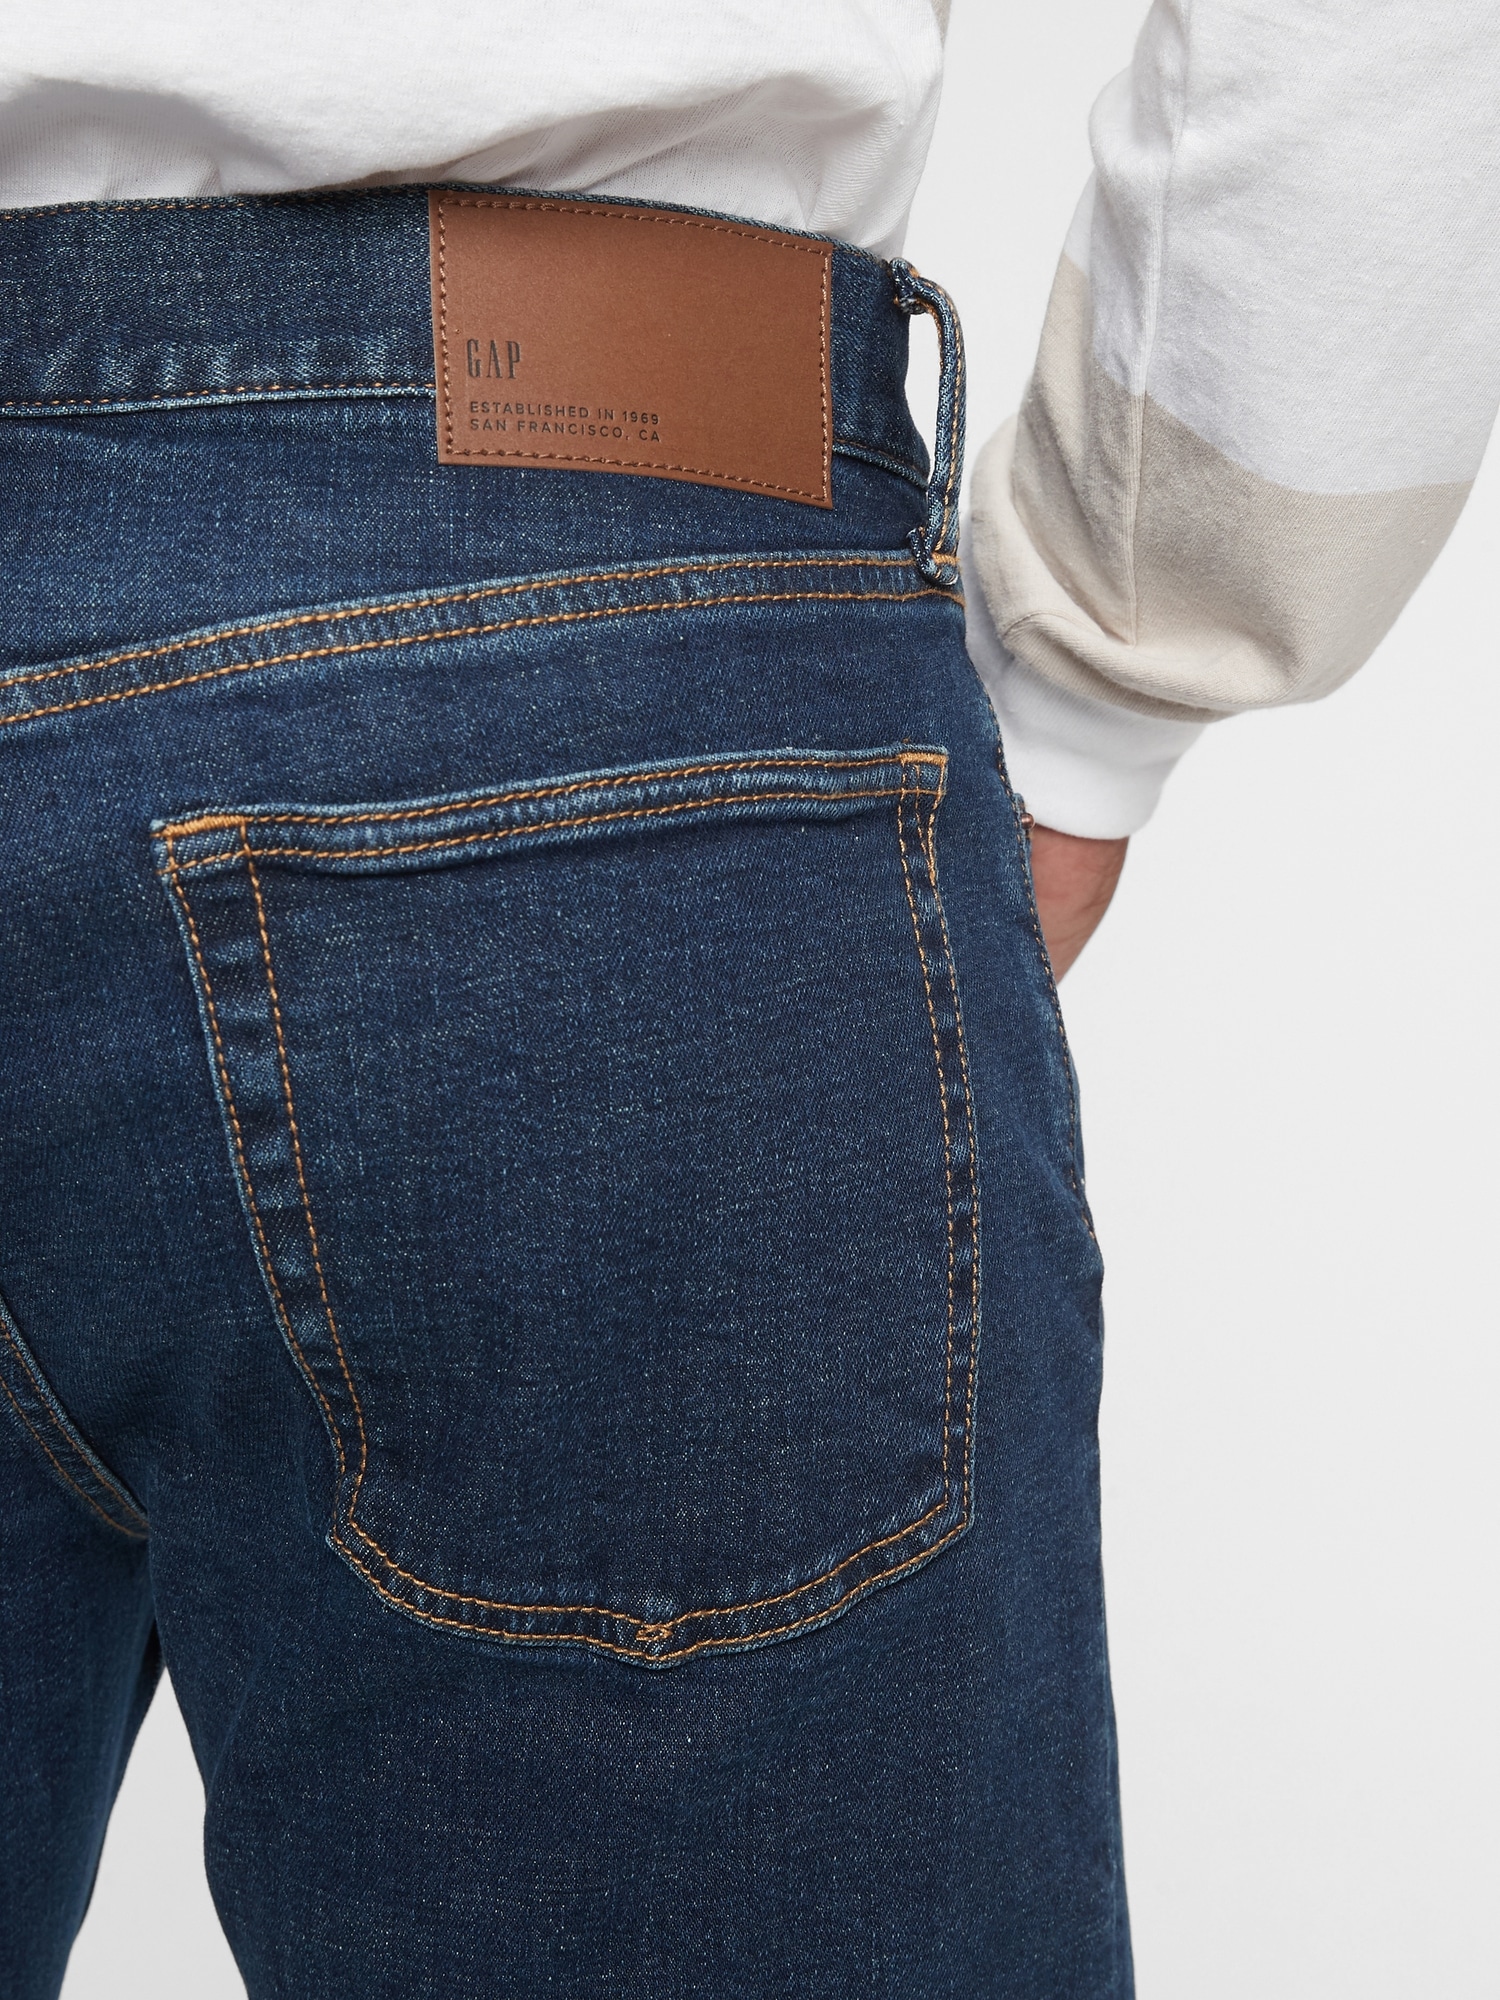 Gap Straight Jeans in GapFlex with Washwell - ShopStyle